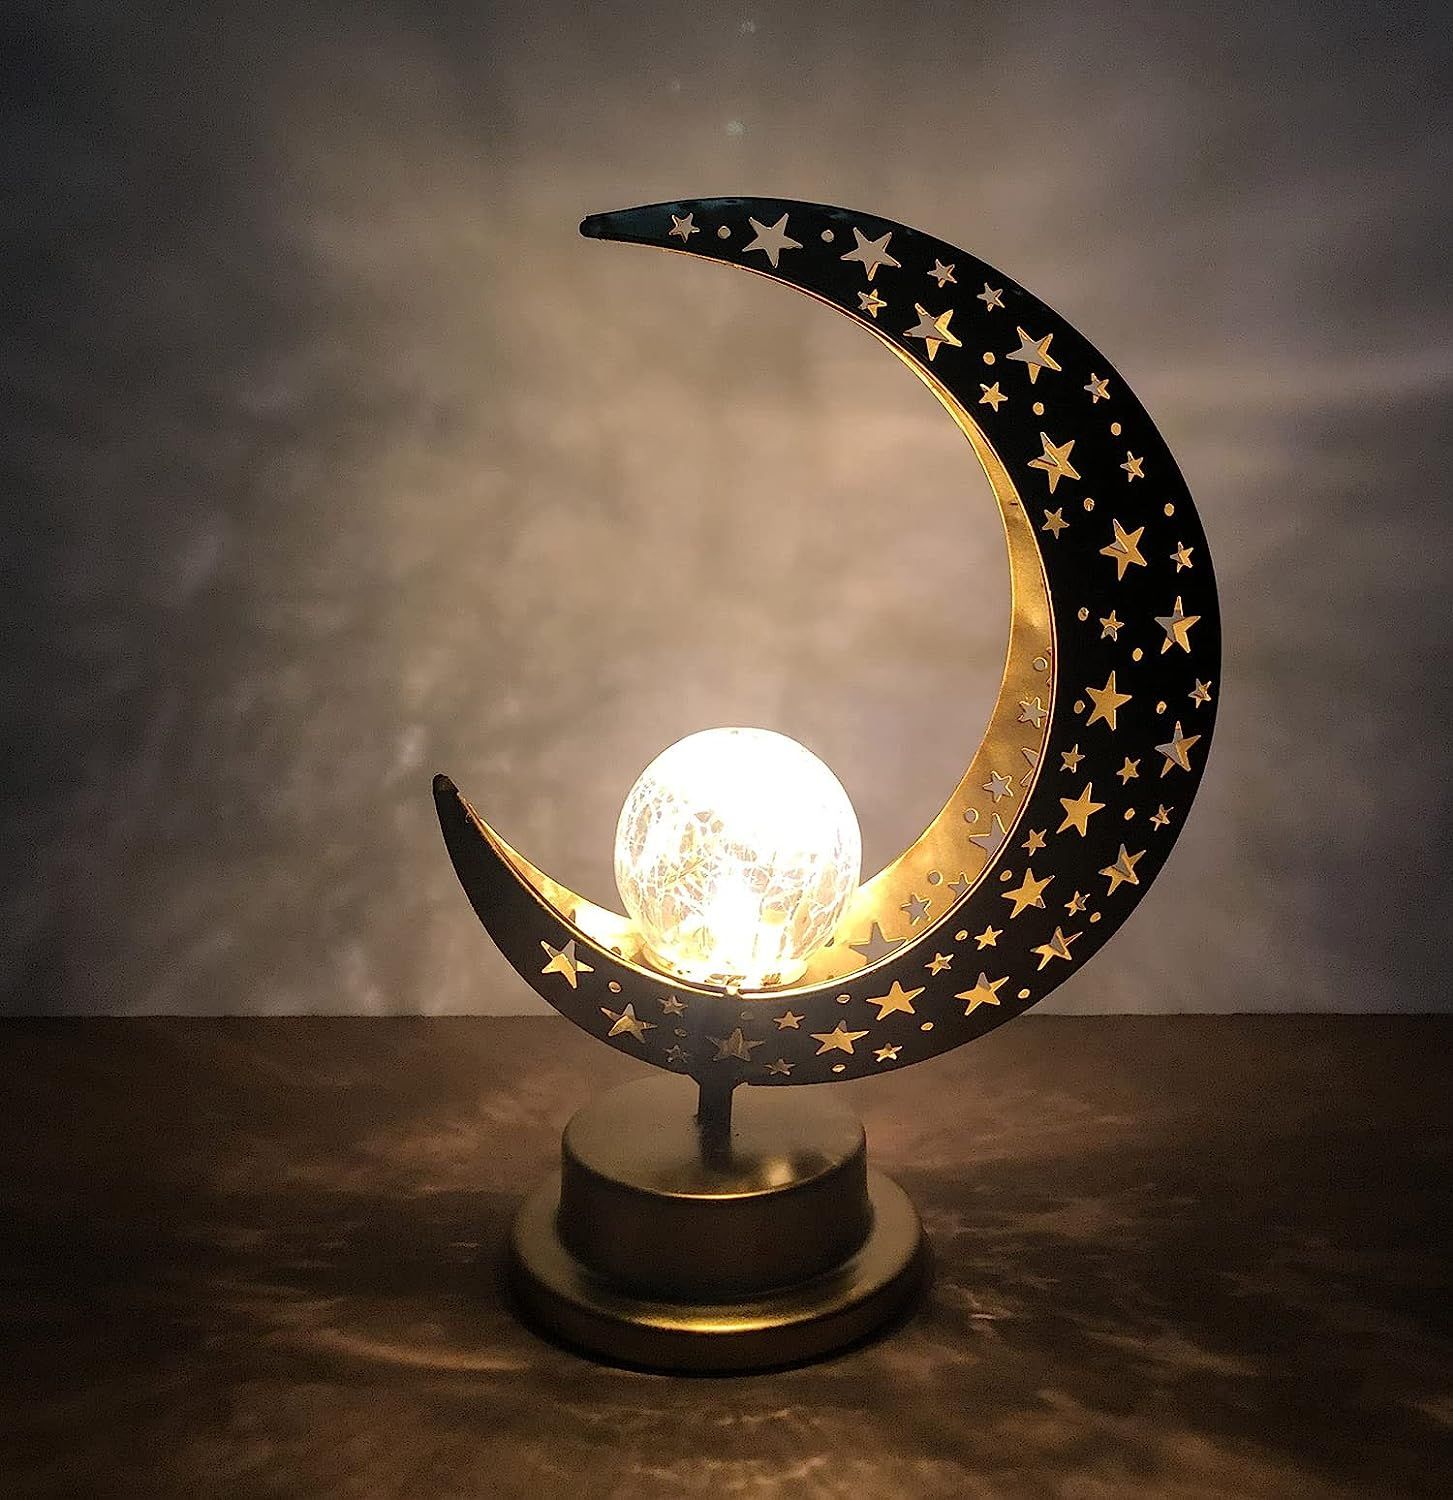 A crescent moon shaped cut tin lamp with tiny stars all over it, and a round ball filled with string lights resting in the lower curve 